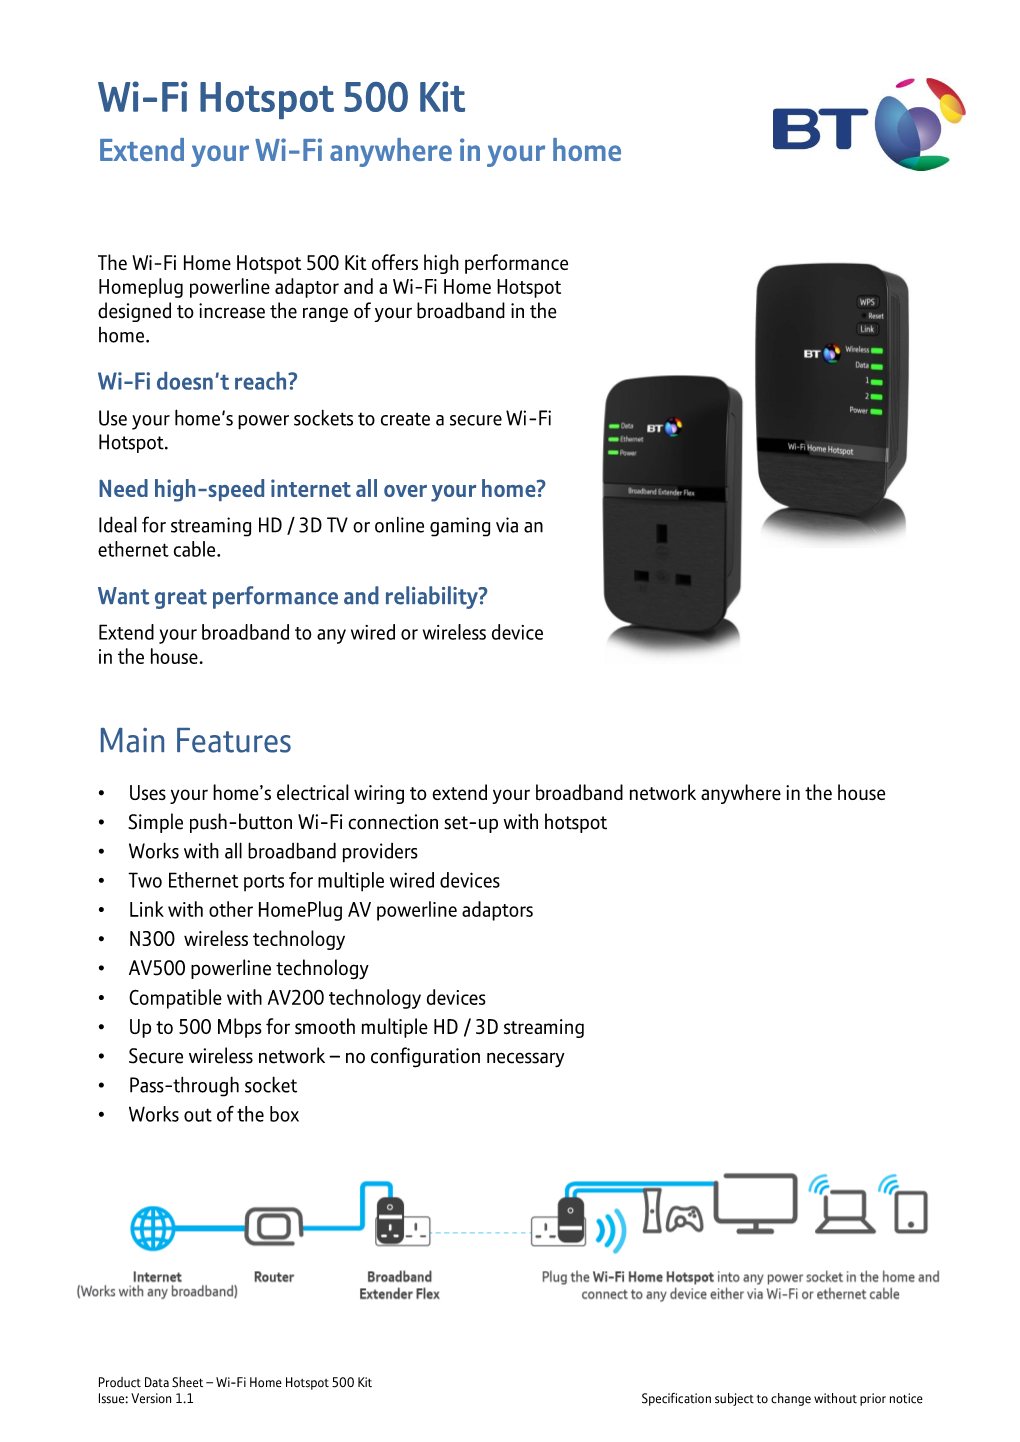 Wi-Fi Hotspot 500 Kit Extend Your Wi-Fi Anywhere in Your Home